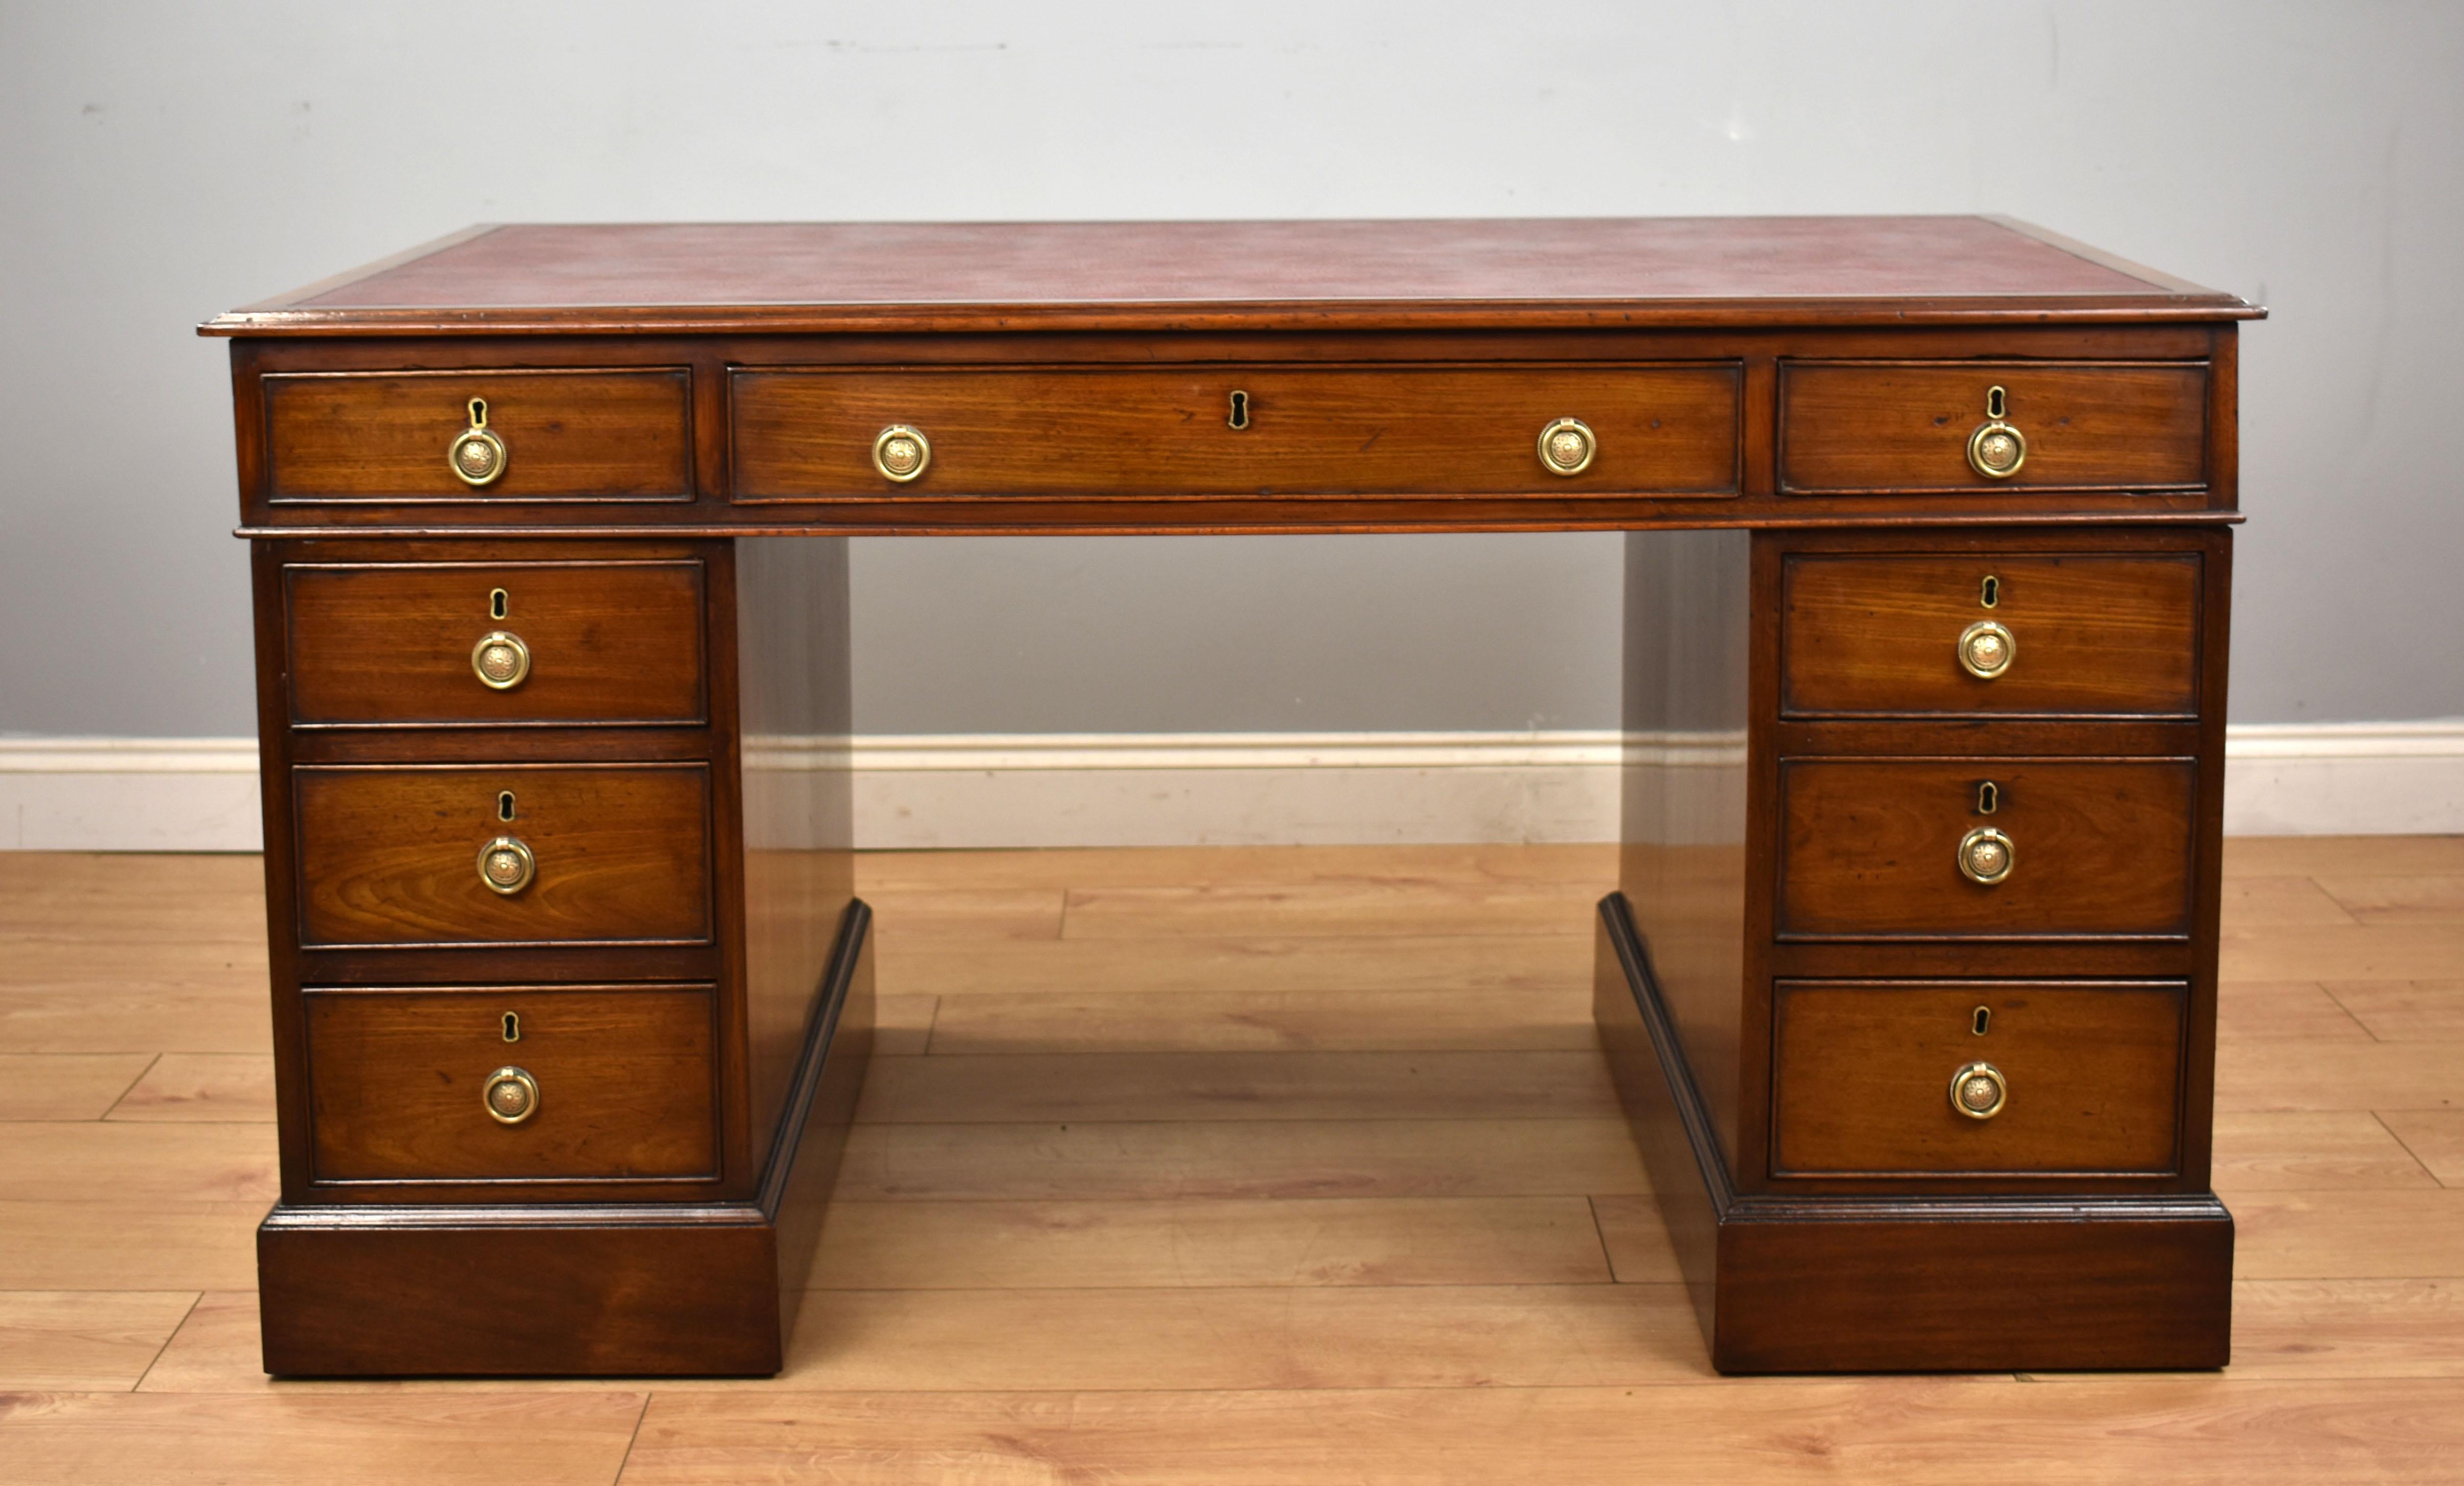 For sale is a Victorian mahogany partners desk, having a faux leather writing surface above three drawers and a further three drawers on the opposing side. The top fits onto two pedestals, each pedestal with three drawers to the front and cupboards